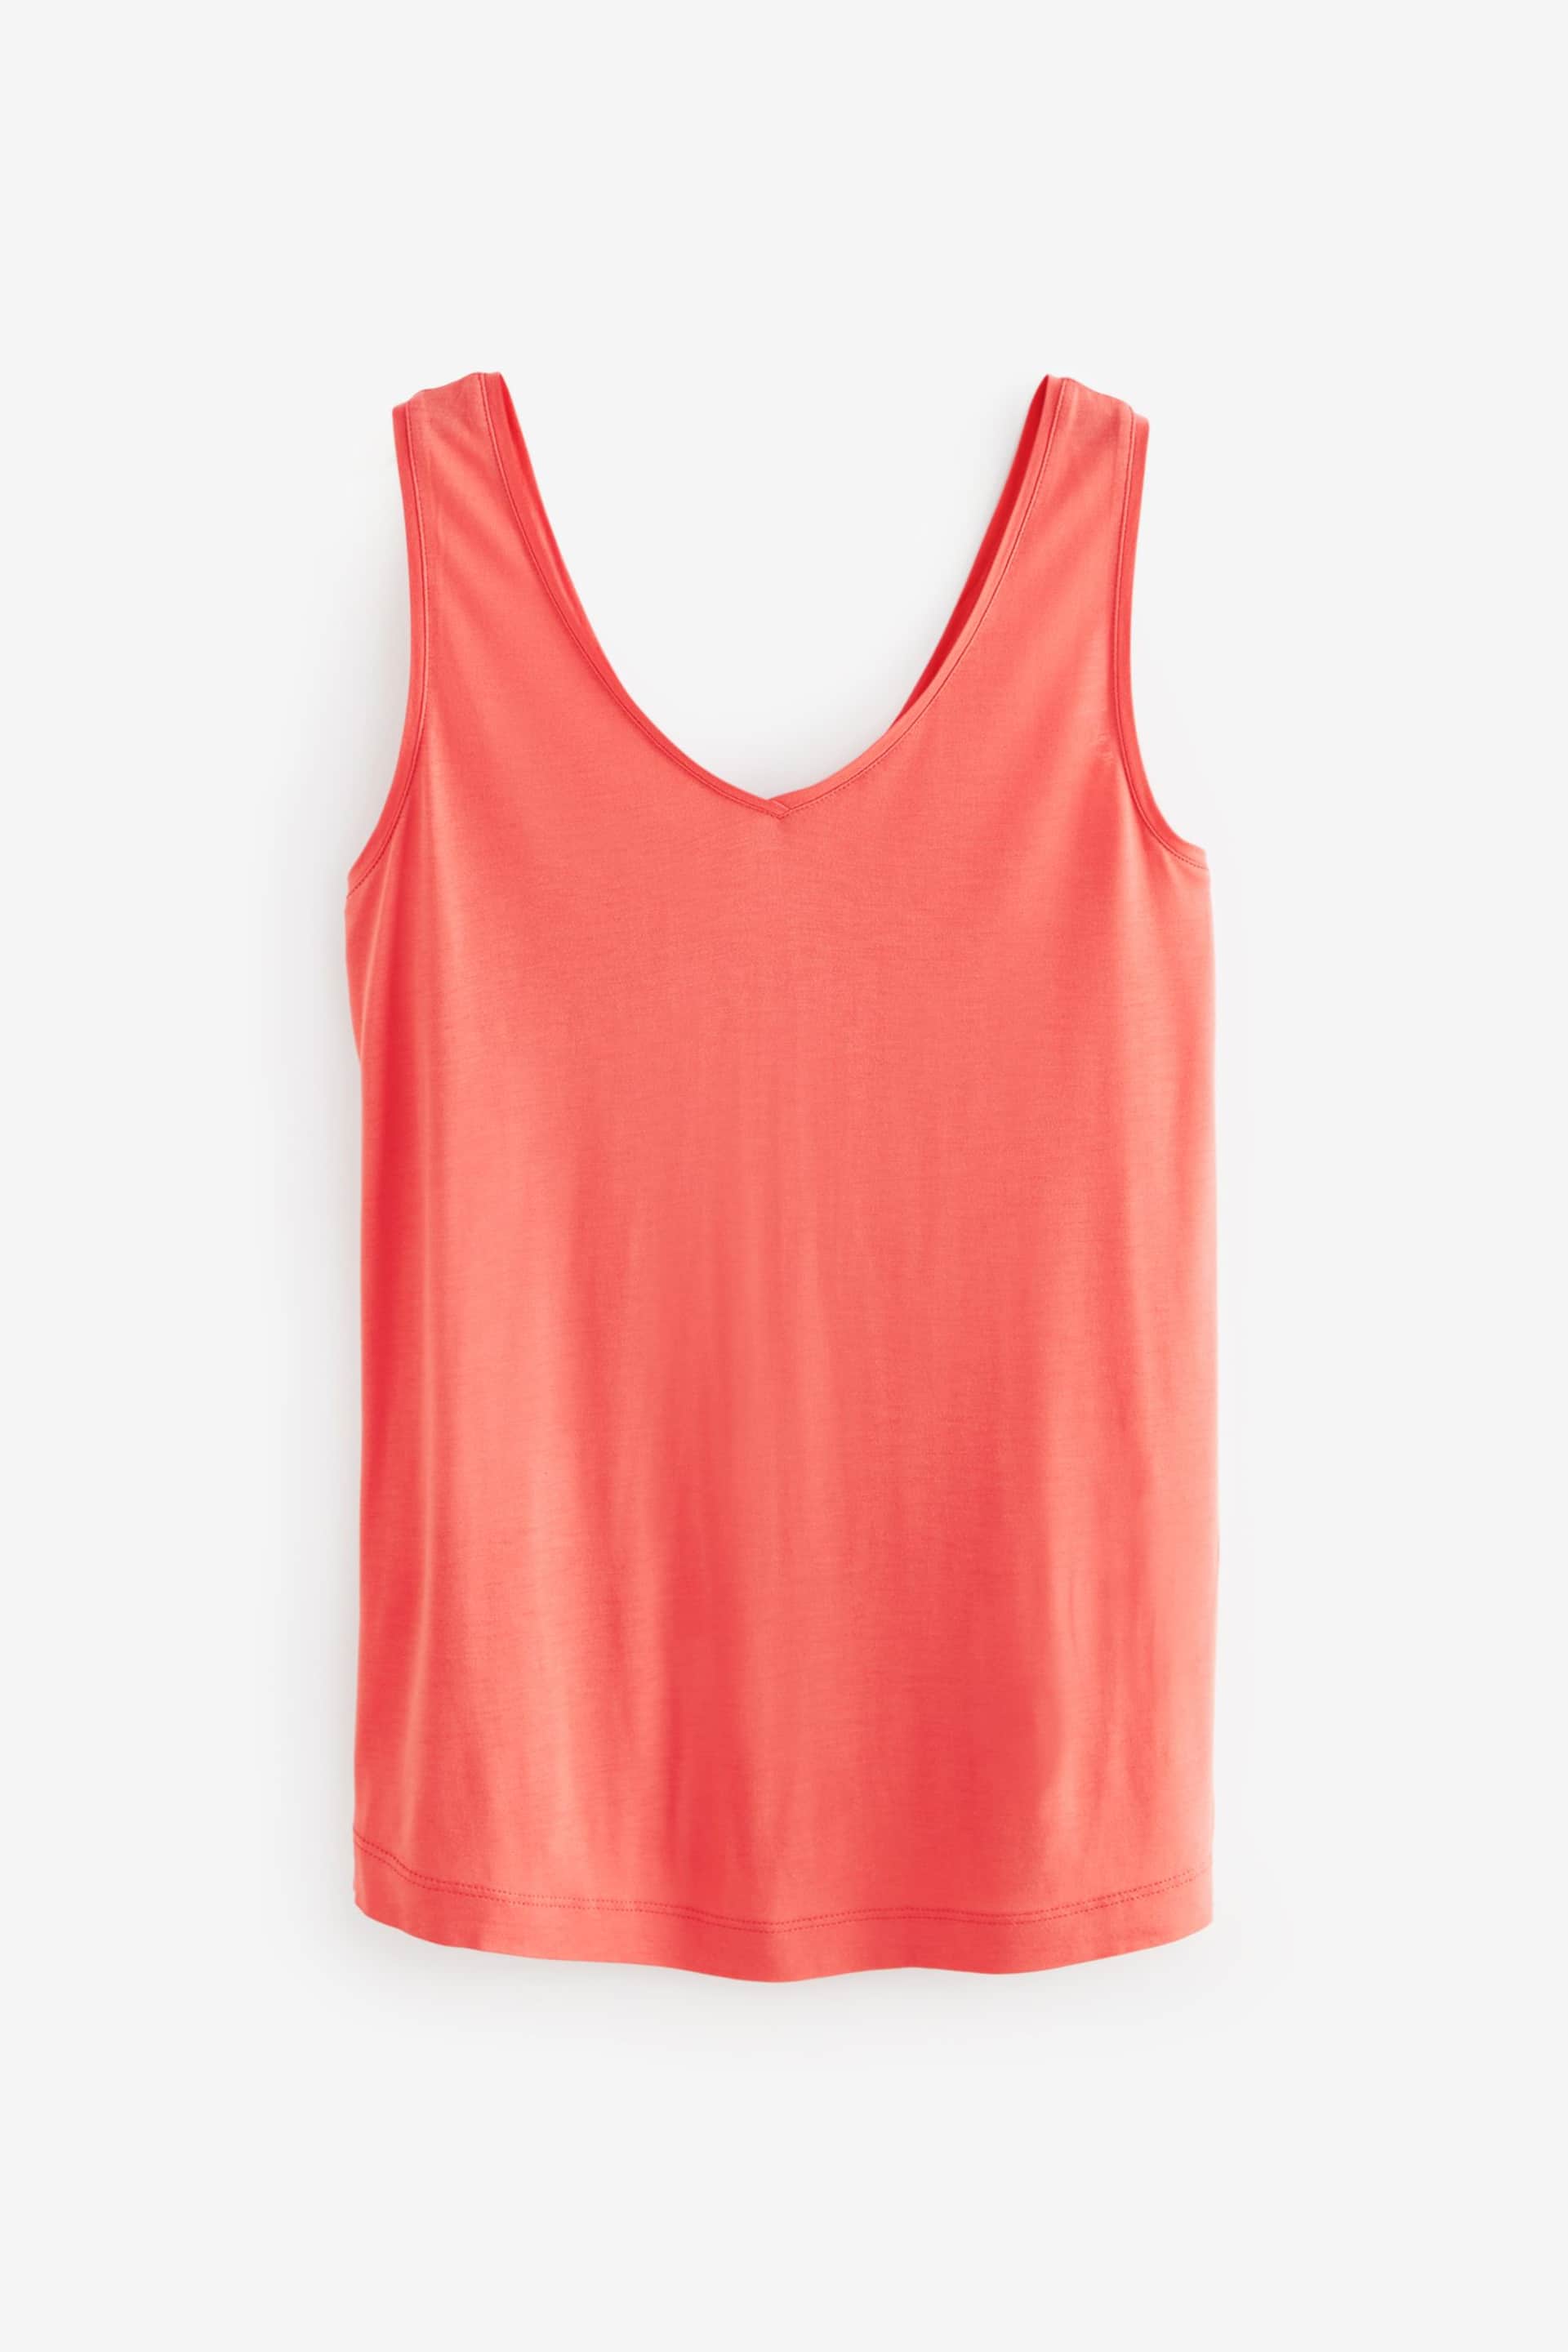 Pink Pale Slouch Vest - Image 4 of 5